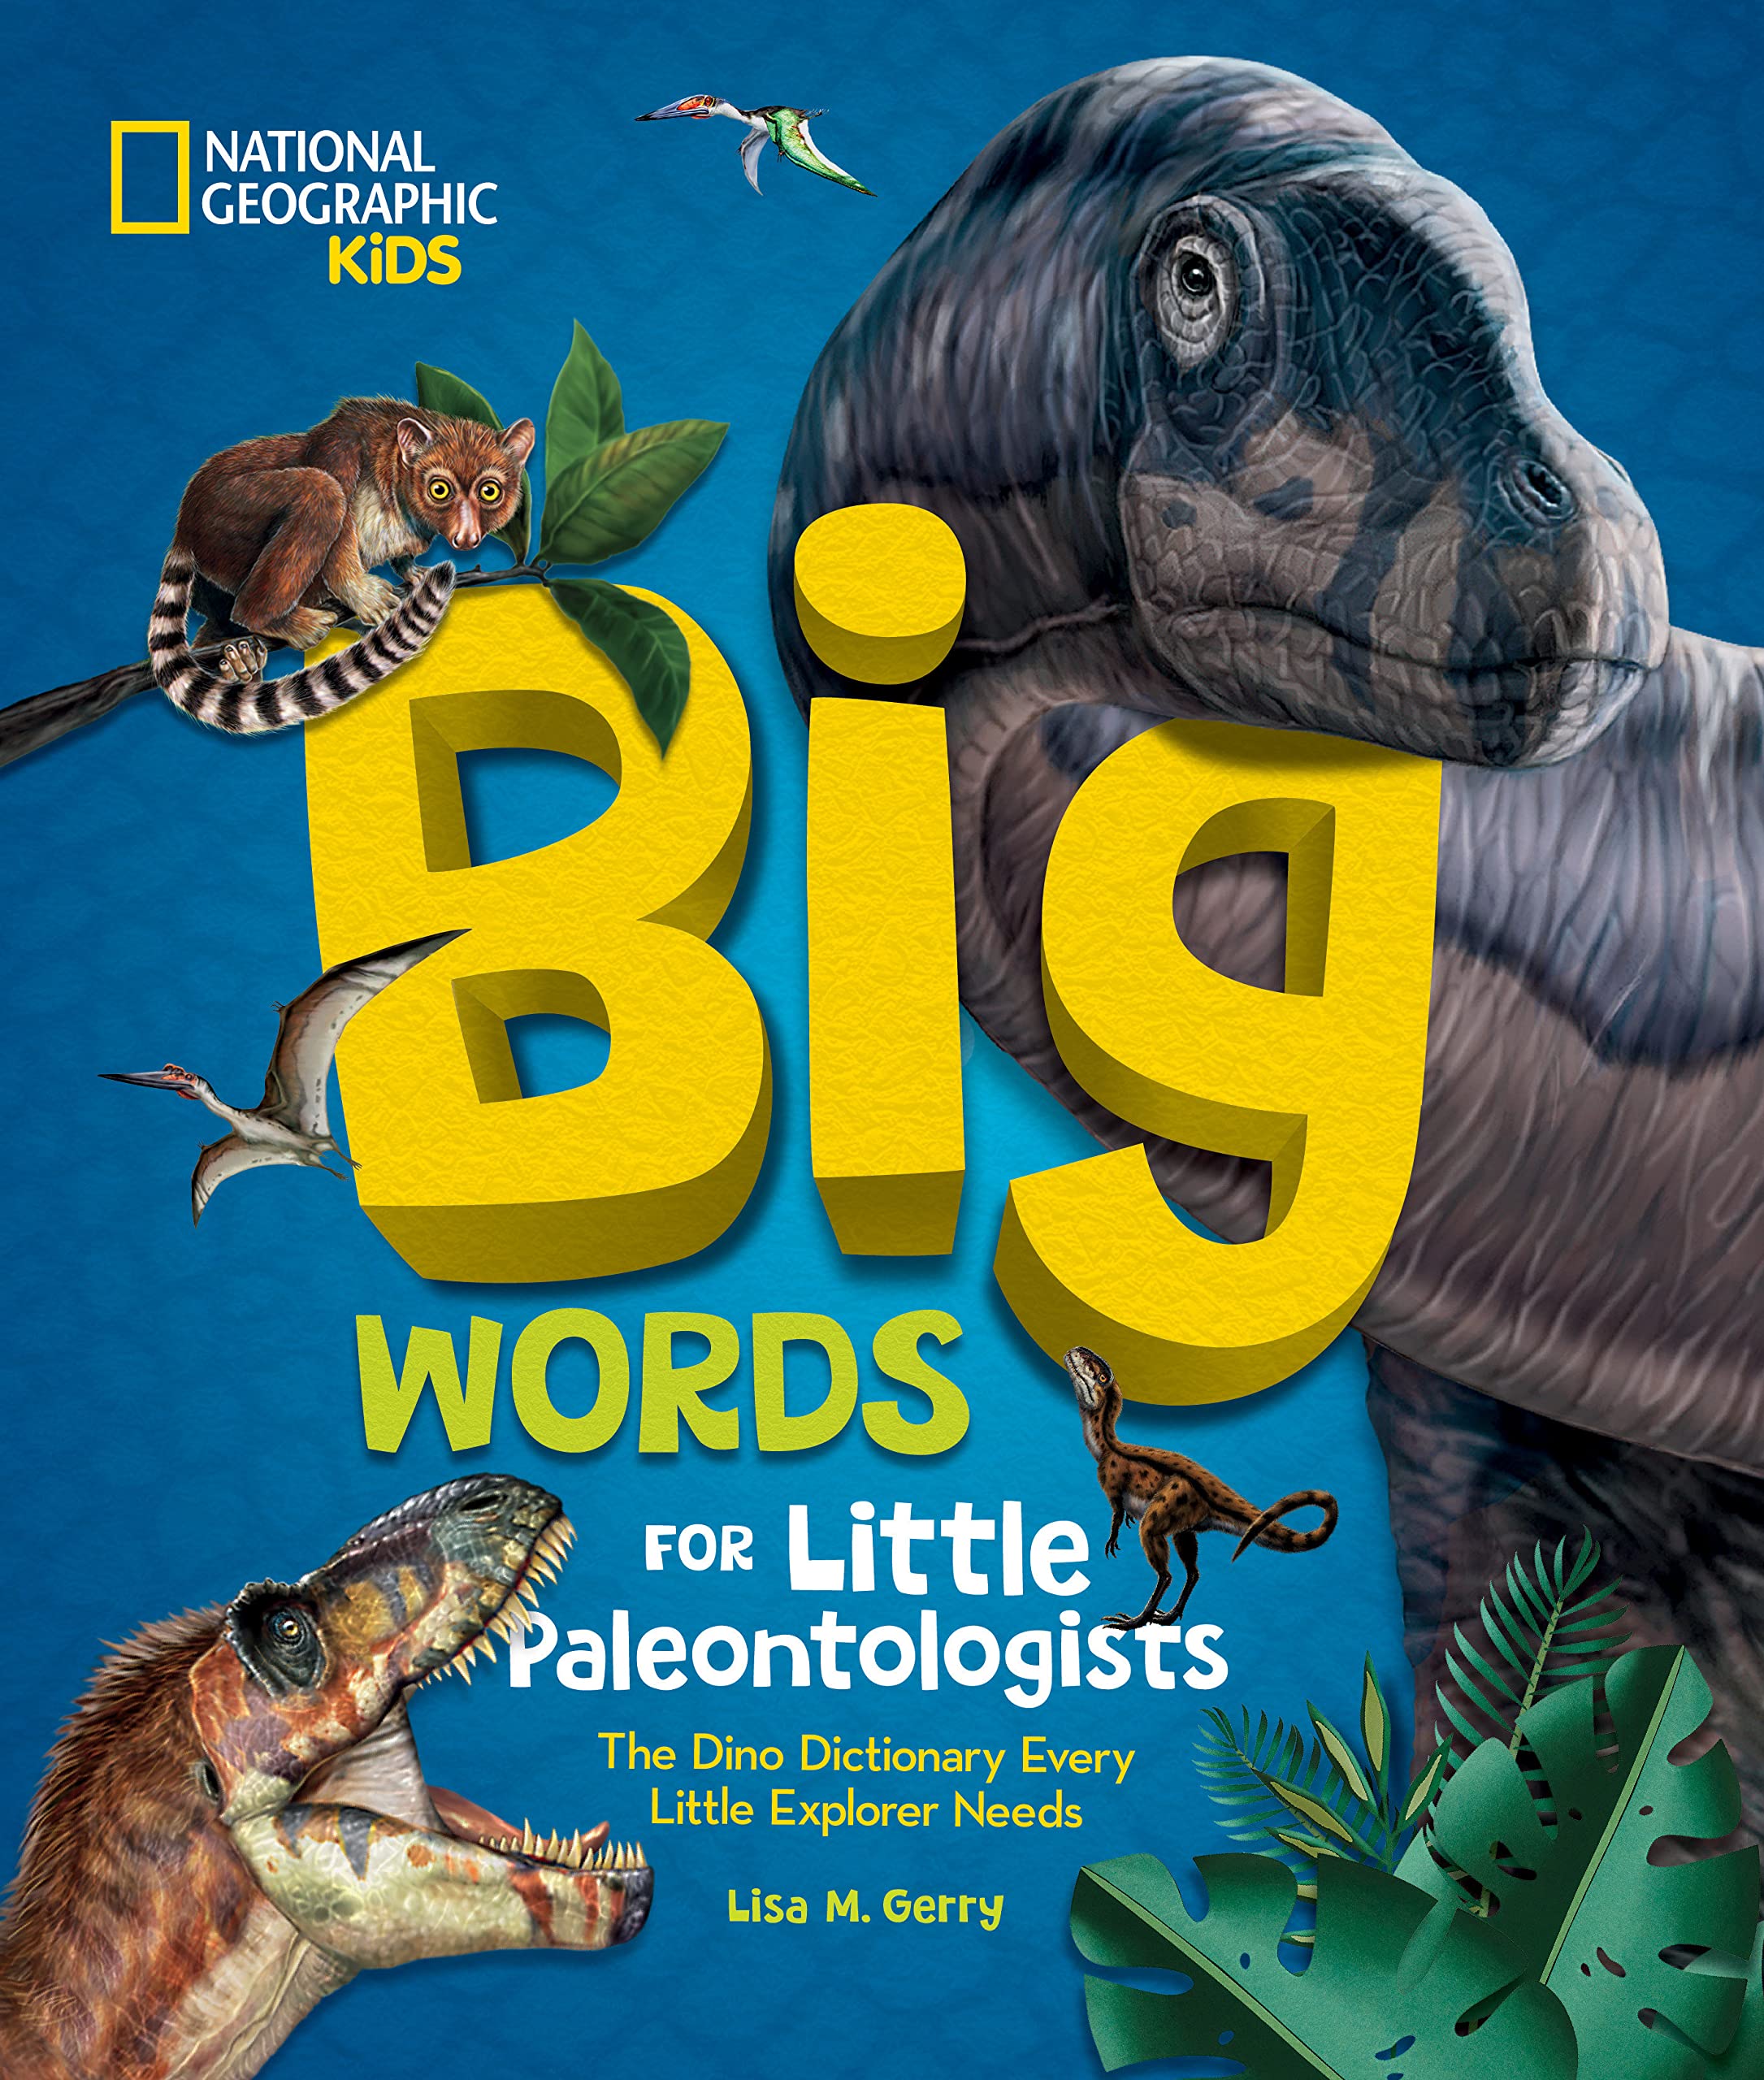 Kids　Lisa　Gerry　M.　Big　Geographic　Paleontologists　Words　Little　National　for　by　Books